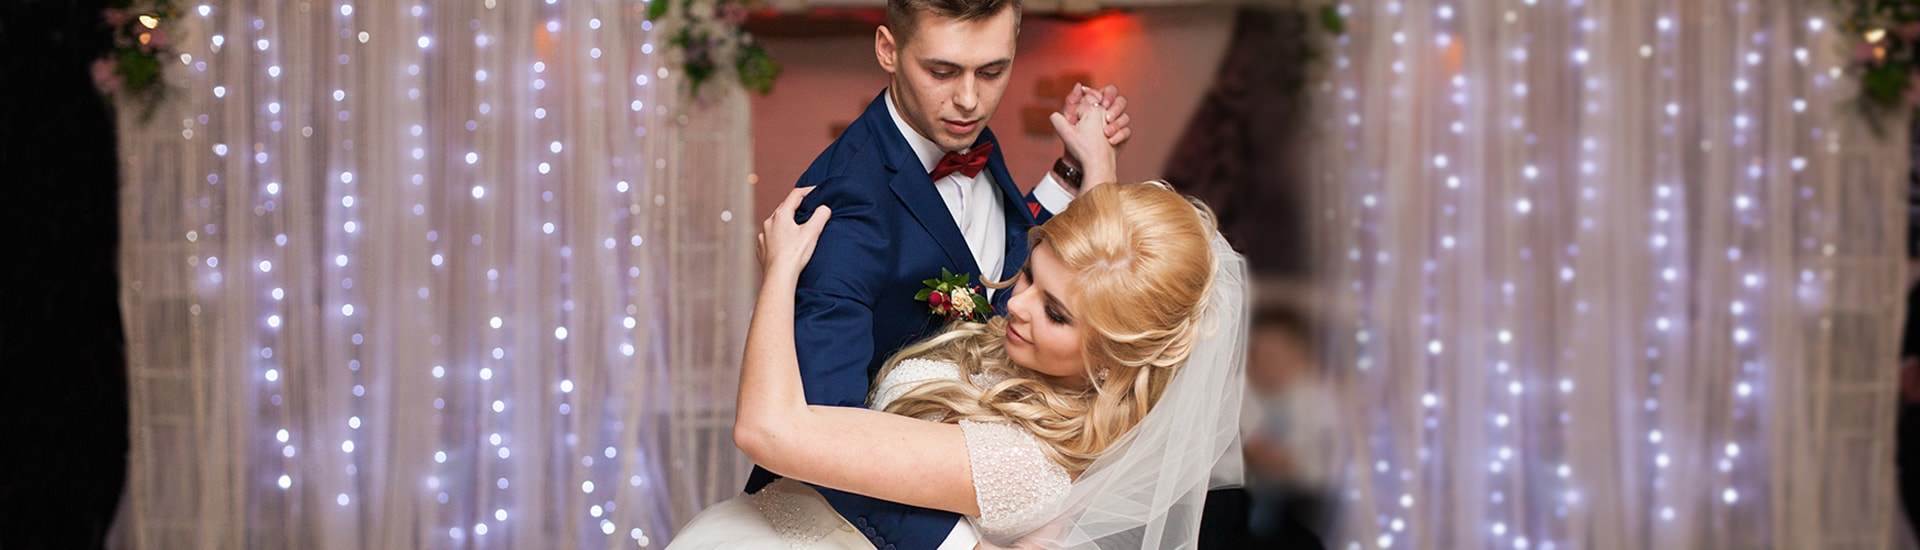 Couple Dancing at their Wedding